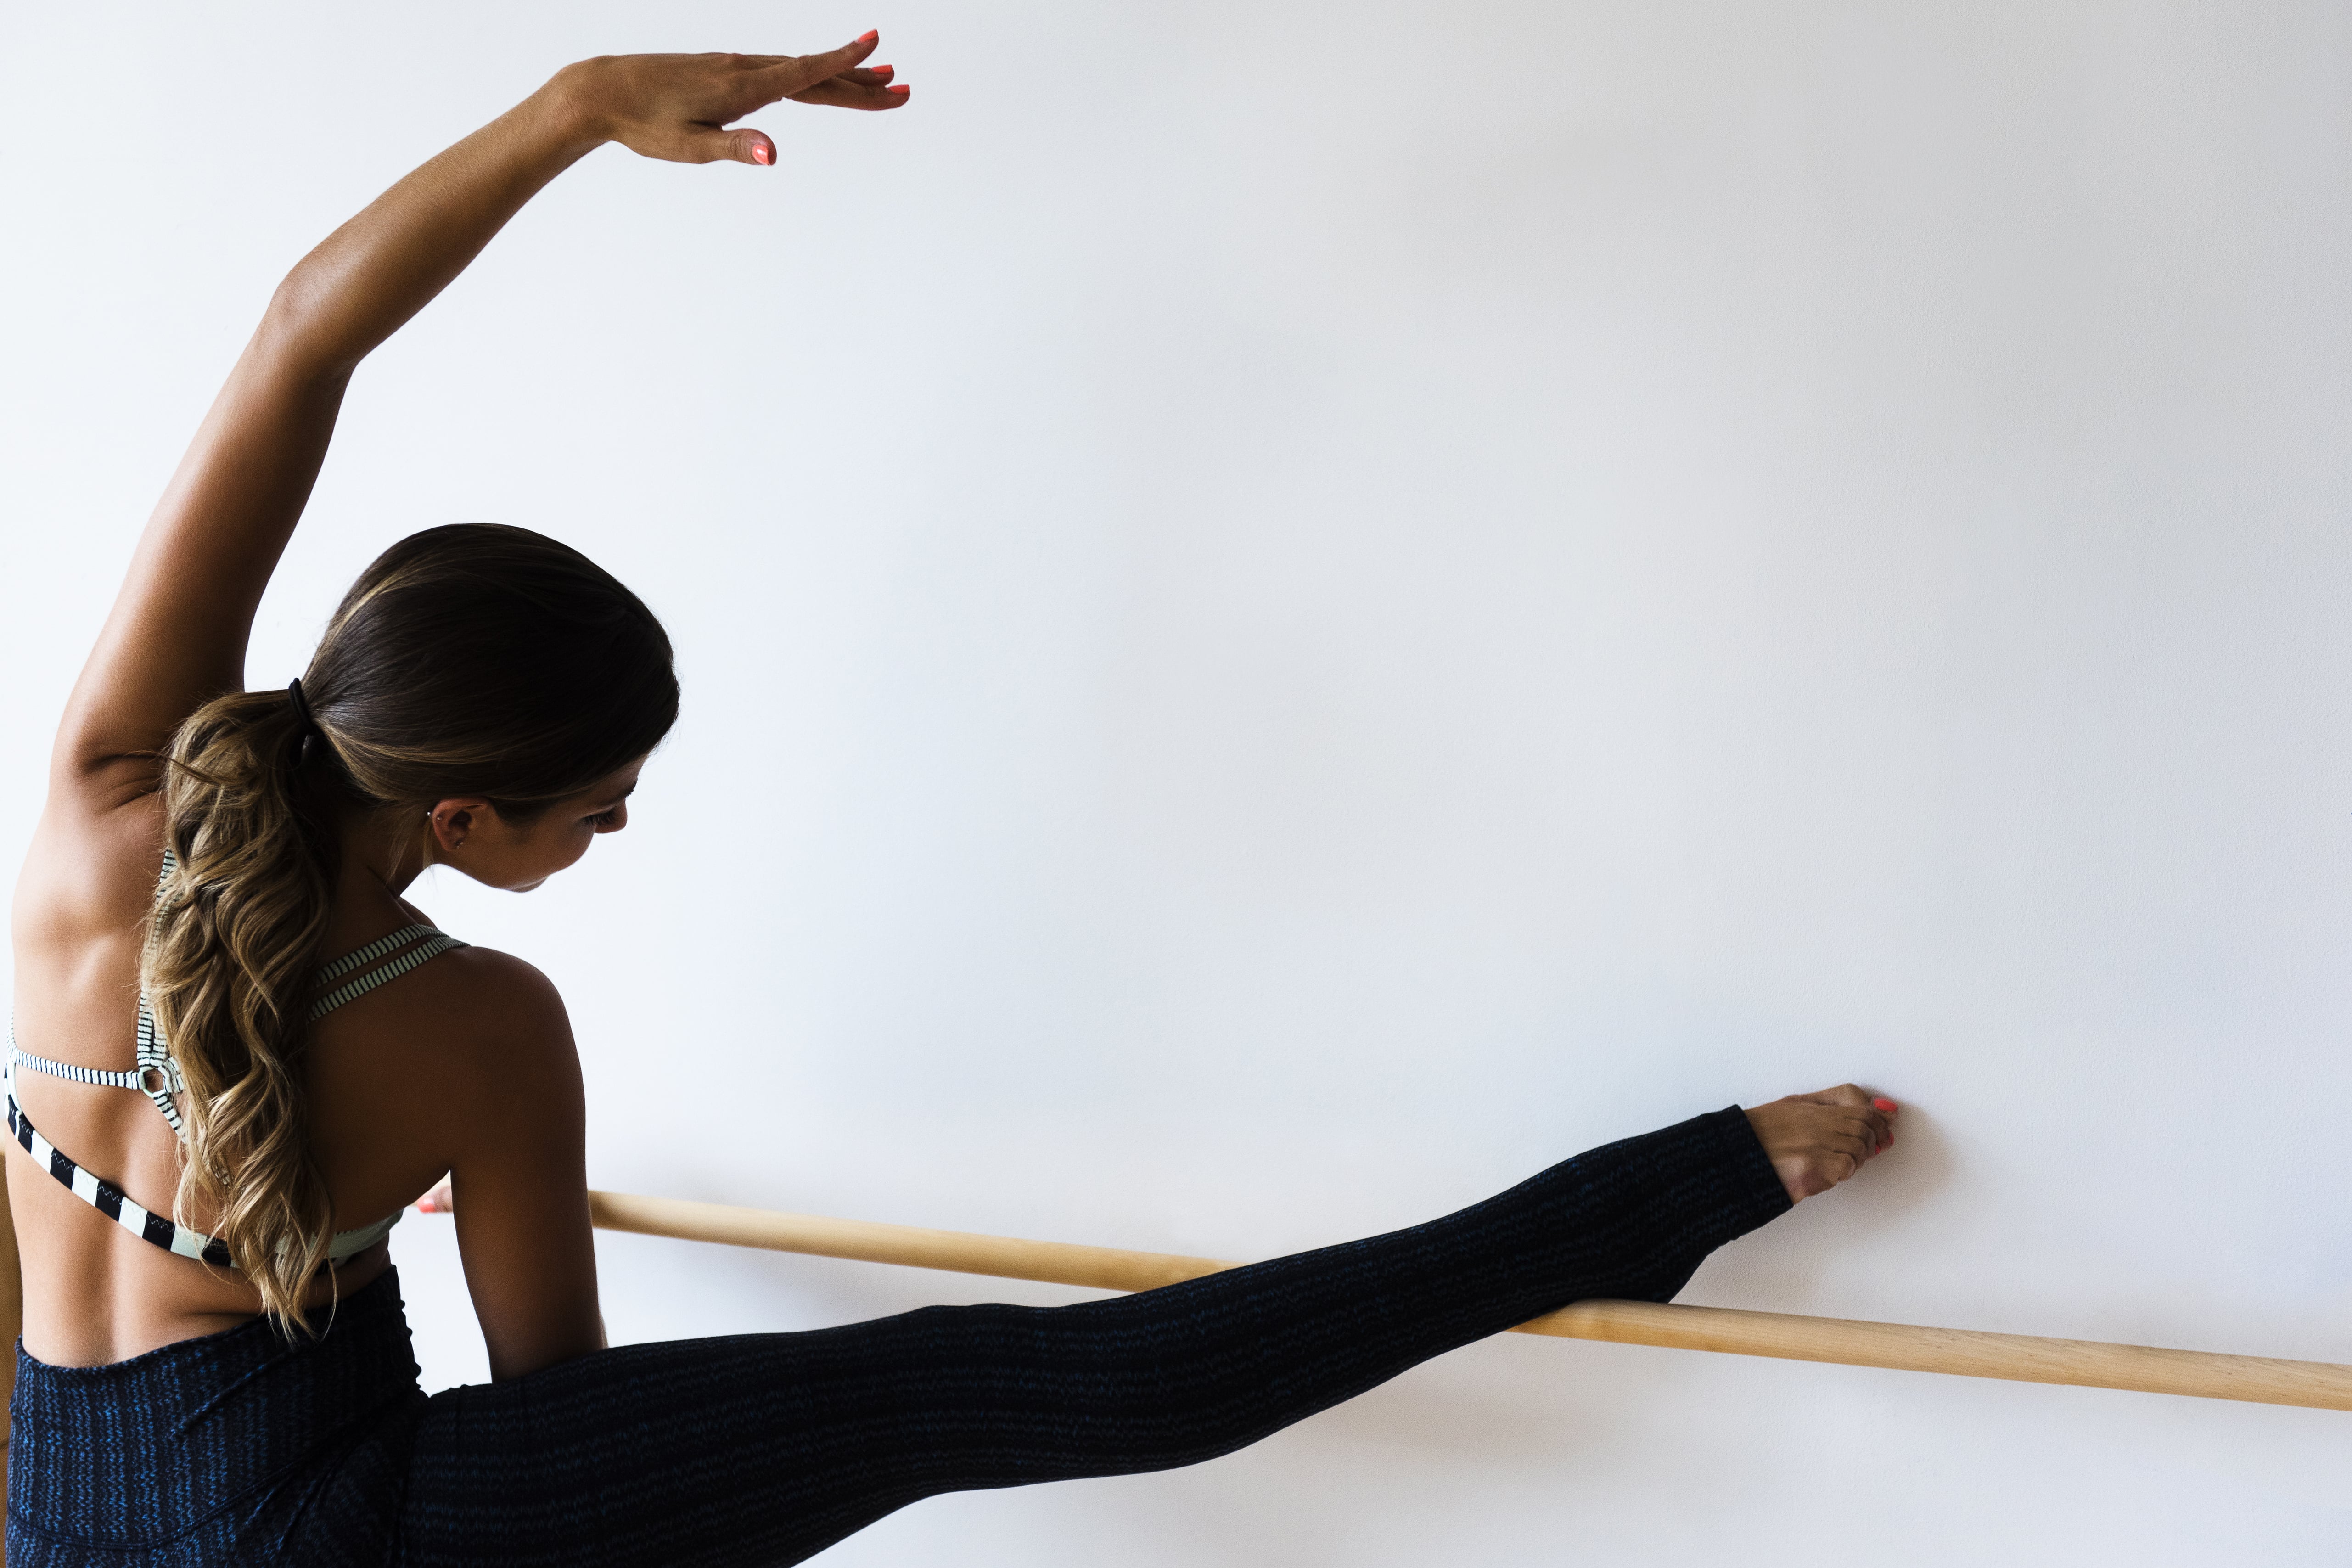 6 Things You Need to Know Before Taking a Barre Class for the